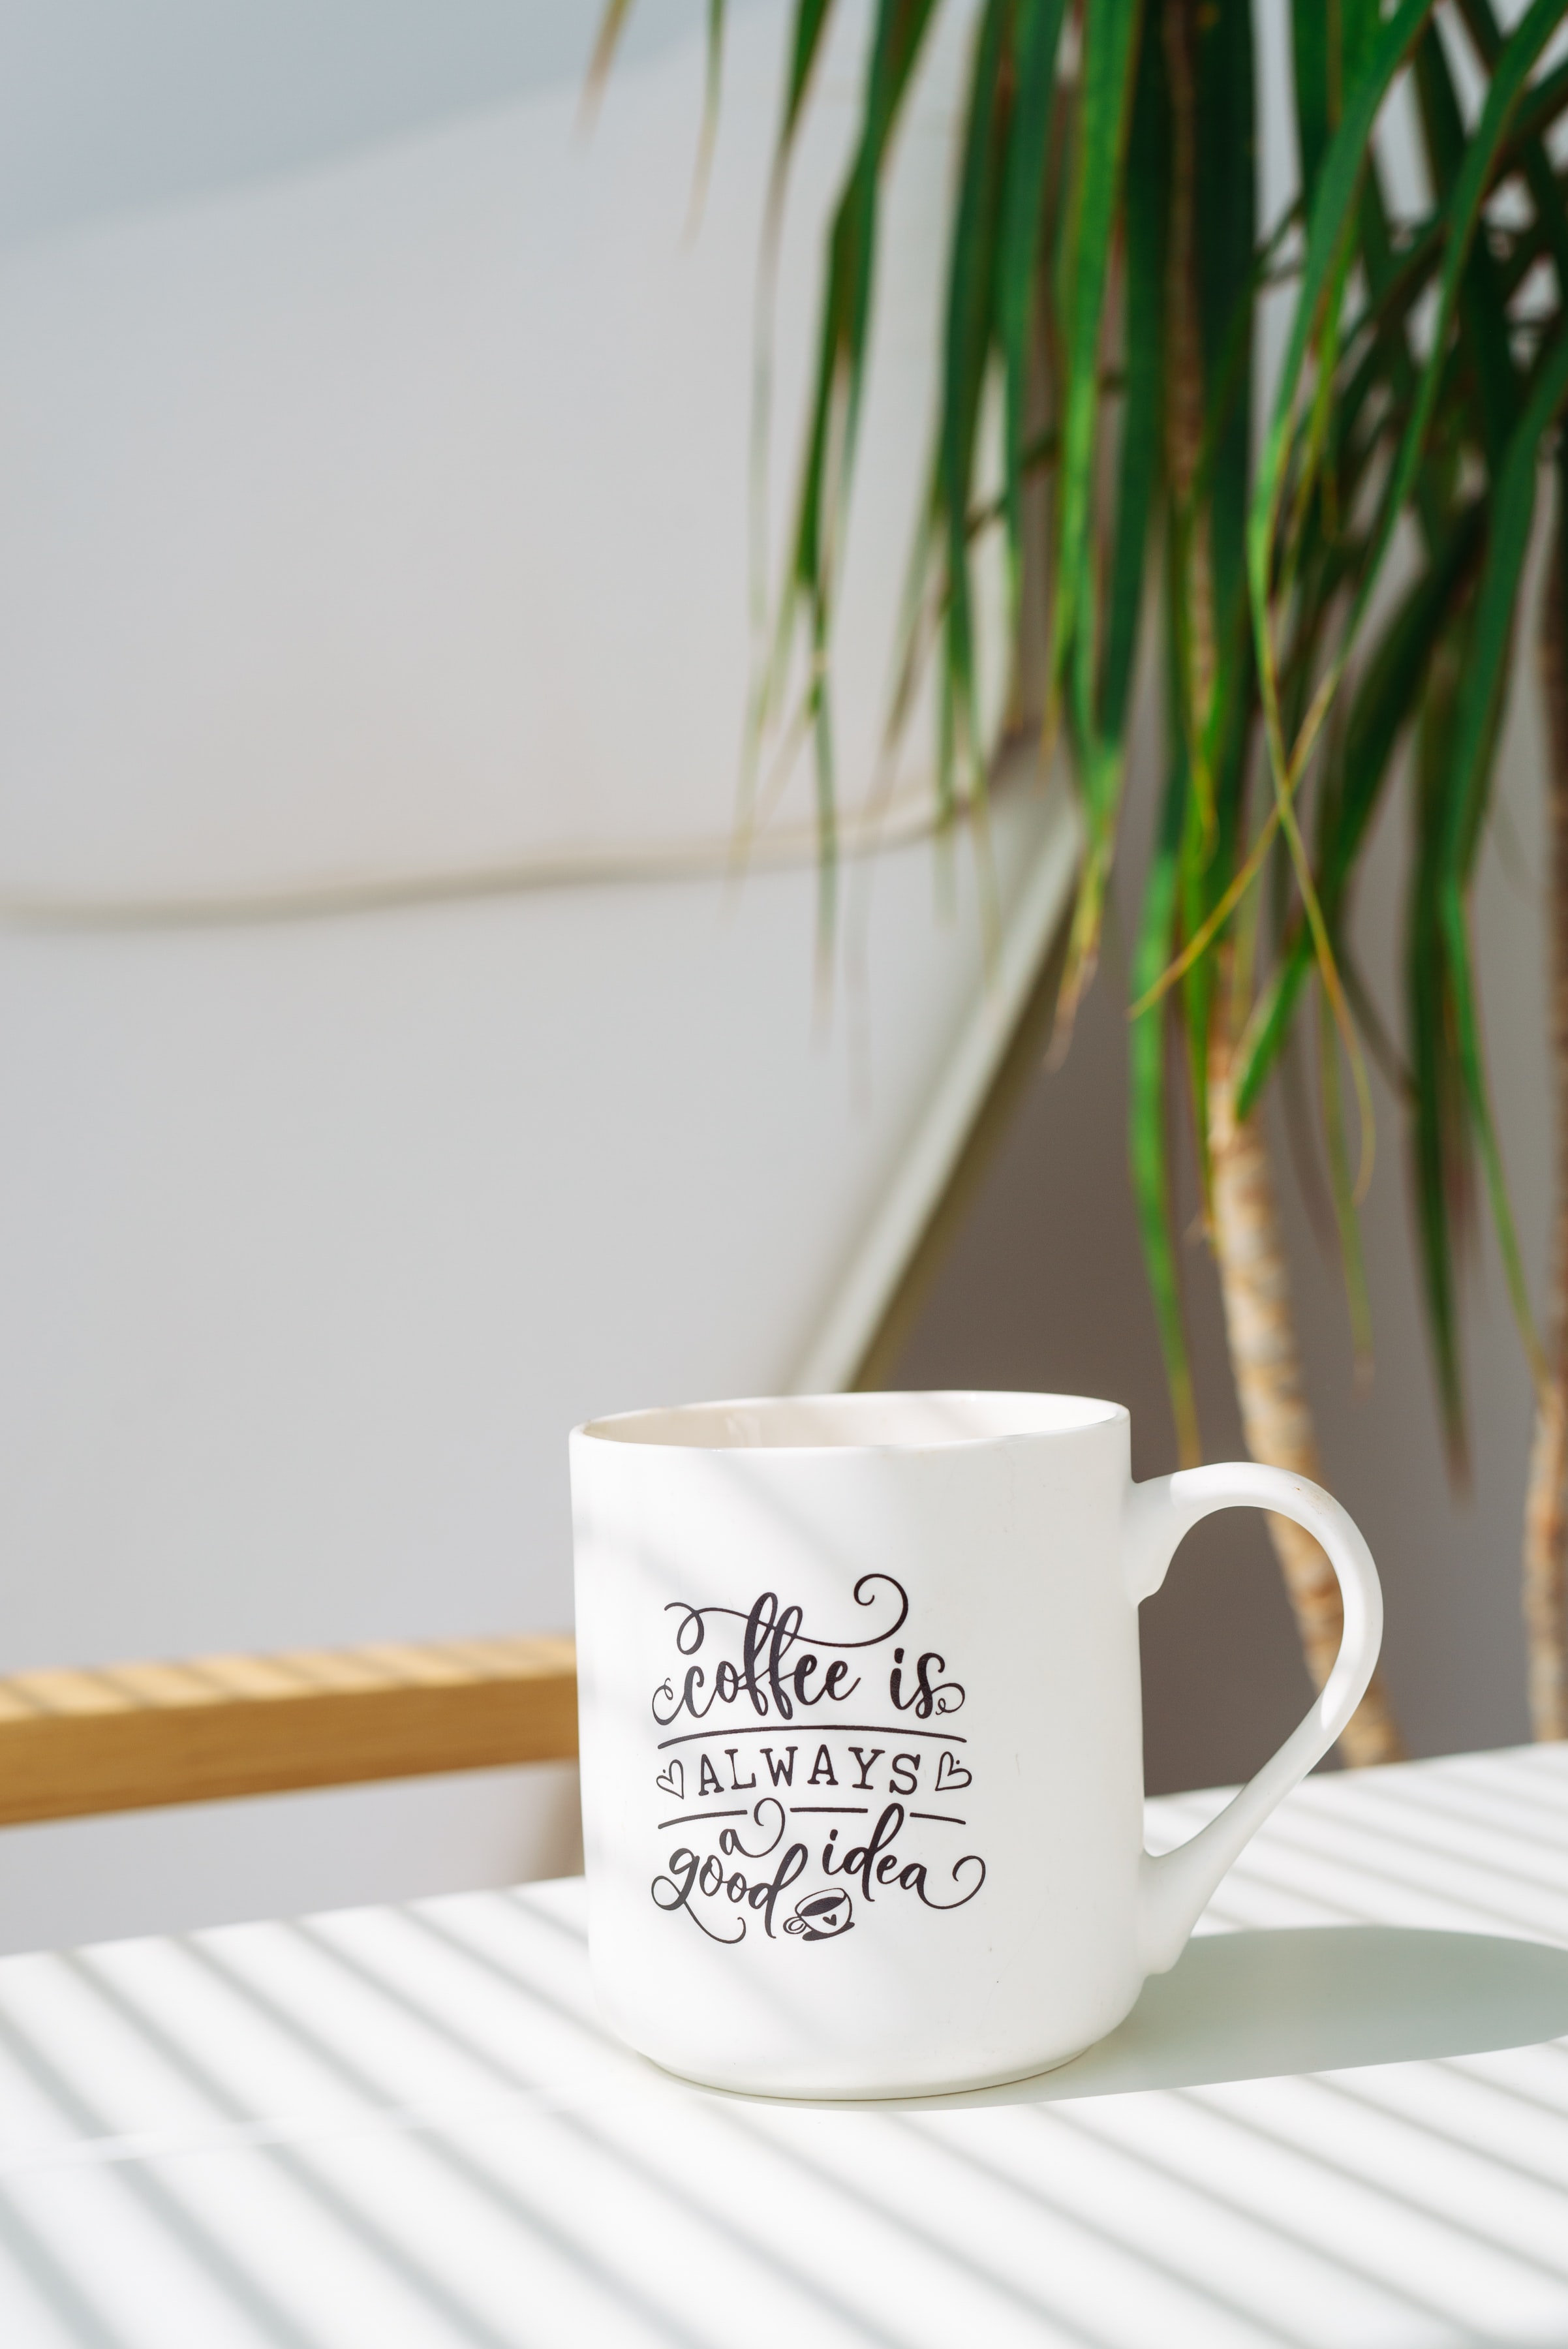 inscription, coffee, plant, words, cup Full HD